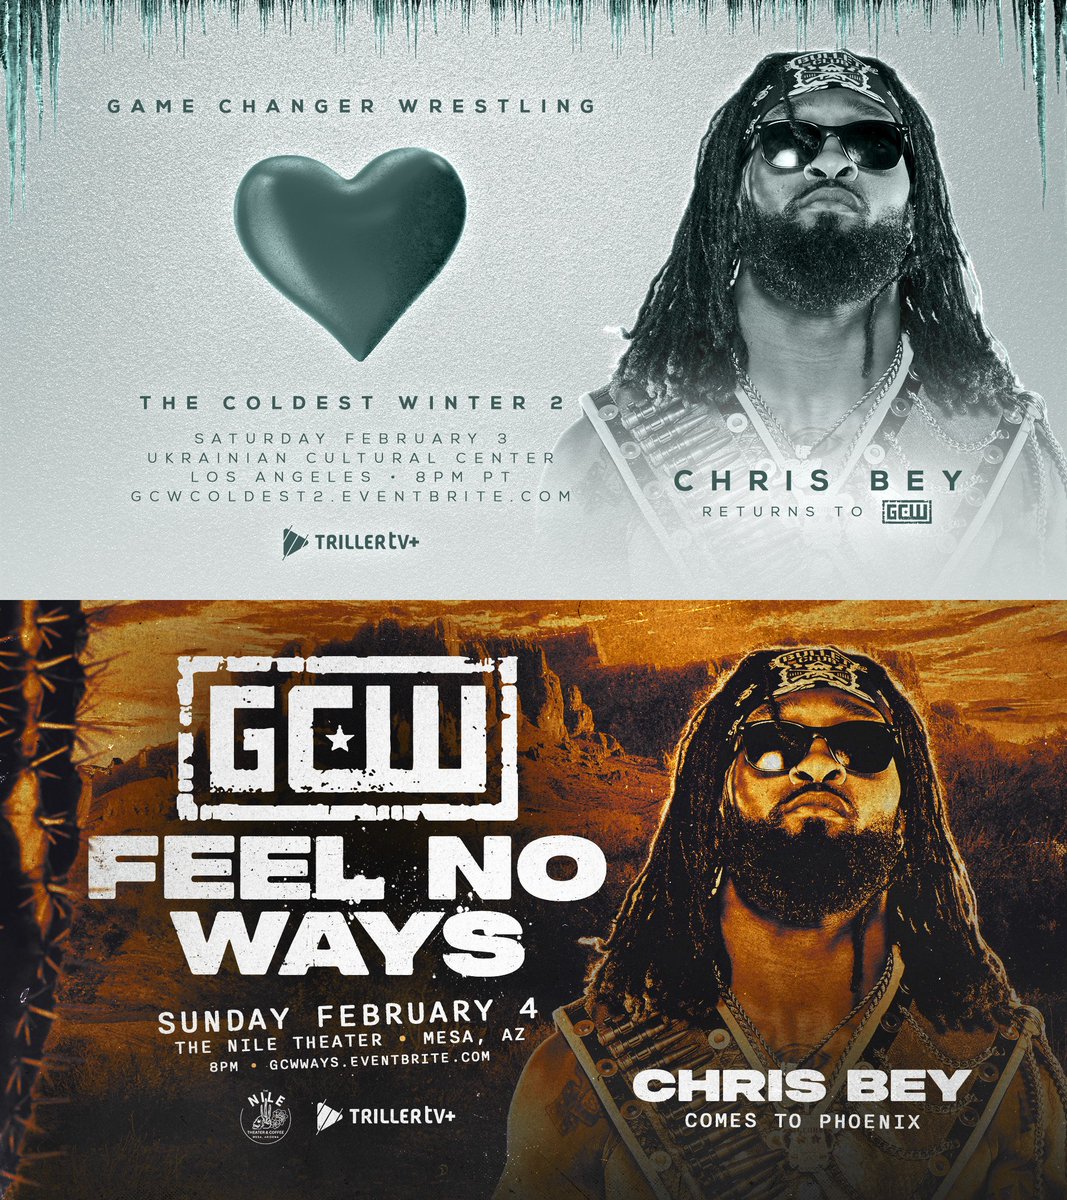 *BREAKING* CHRIS BEY returns to GCW on February 3rd and 4th in LA and PHOENIX! *2/3 - Los Angeles* GCWCOLDEST2.EVENTBRITE.COM *2/4 - Phoenix* (Tix go on Sale Friday 12/22) Watch LIVE on @FiteTV+